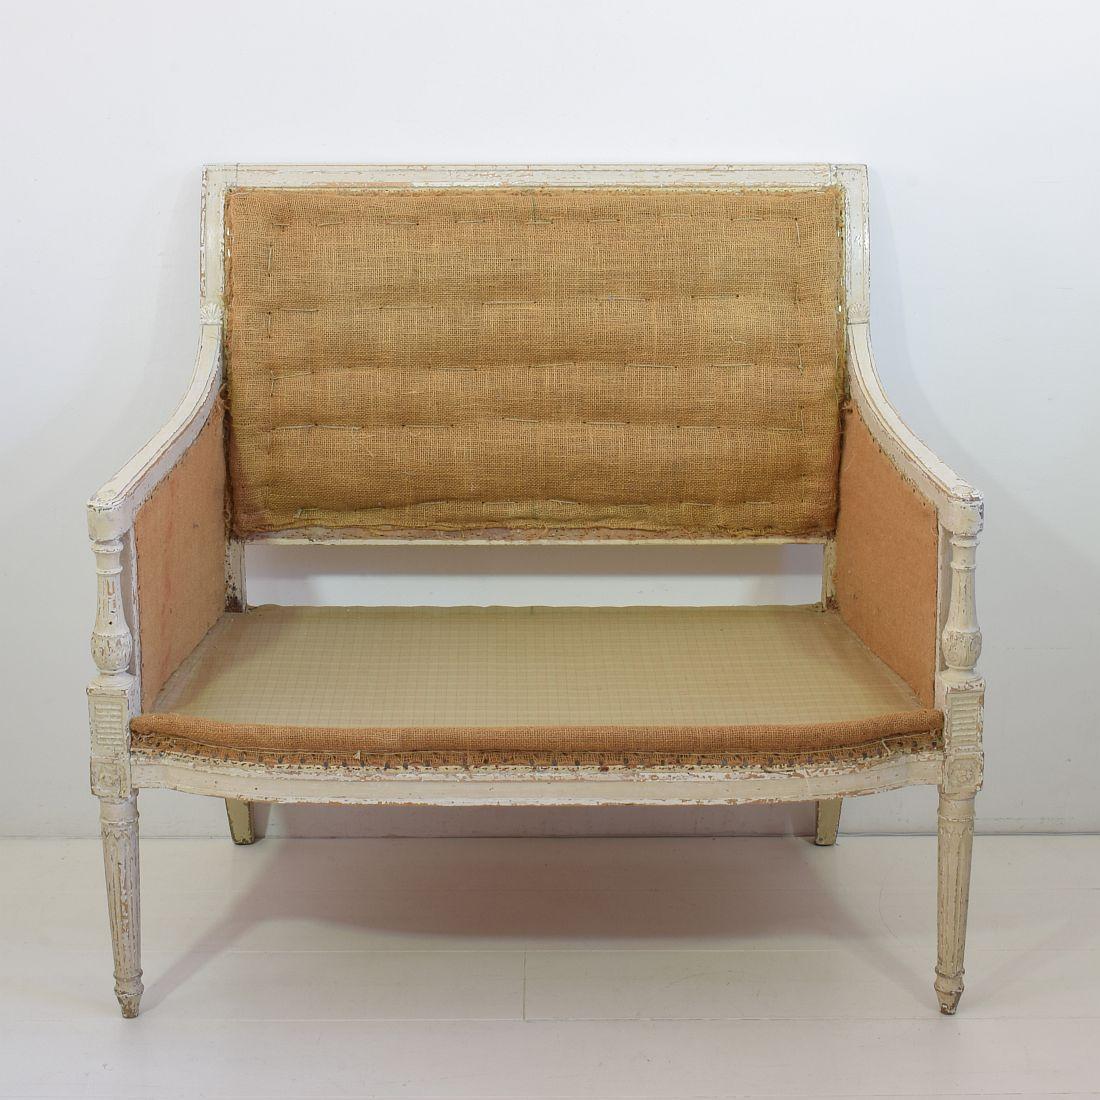 Late 18th Century French Directoire Canape Settee Marquis 1